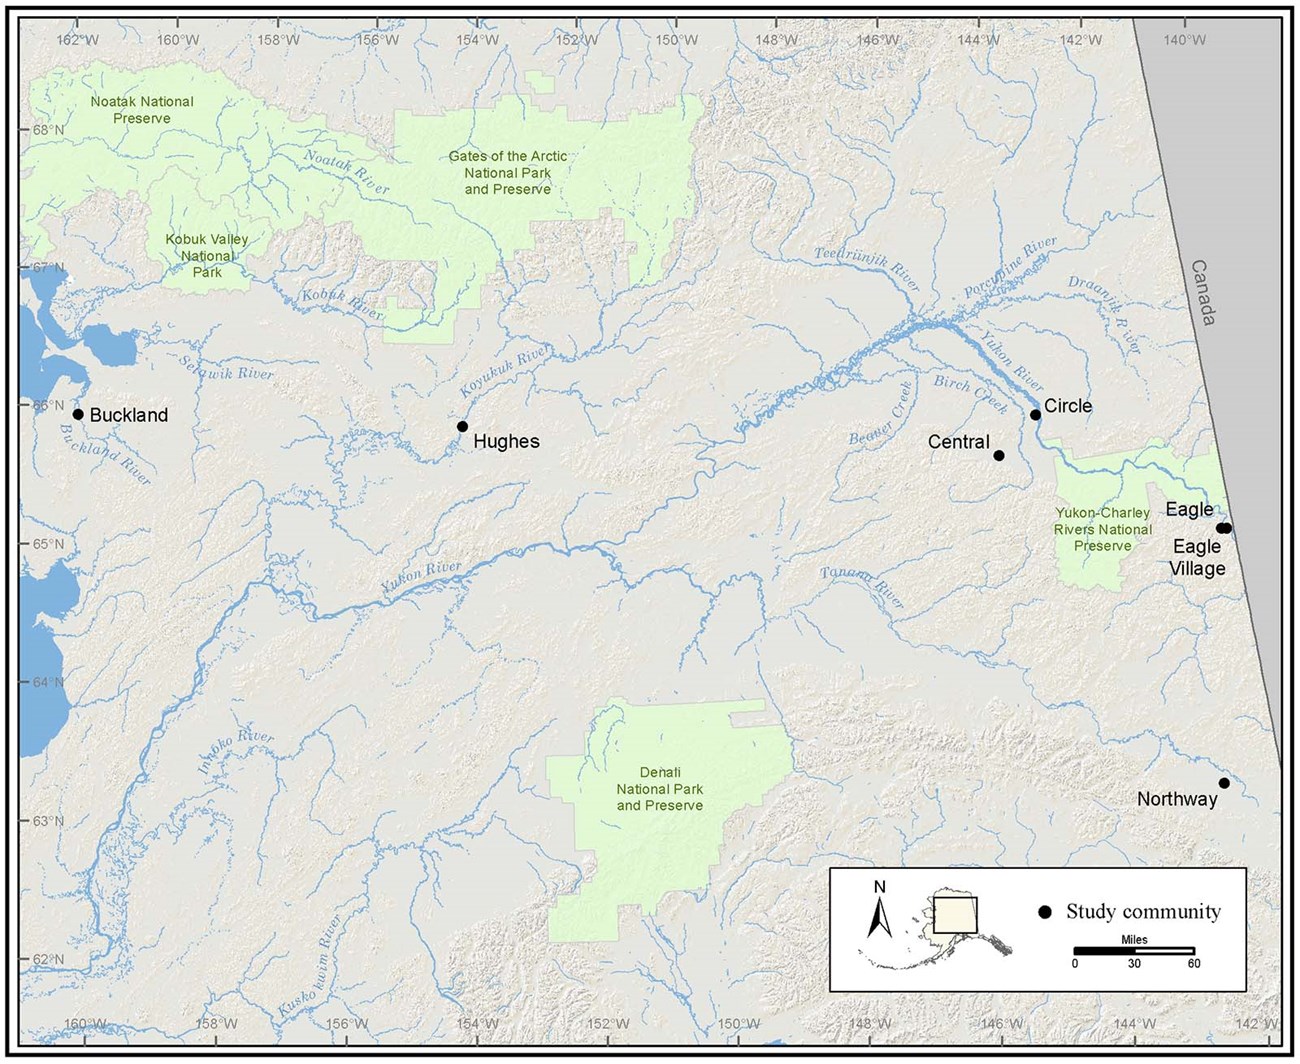 A map showing the location of Yukon River villages mentioned in the article.